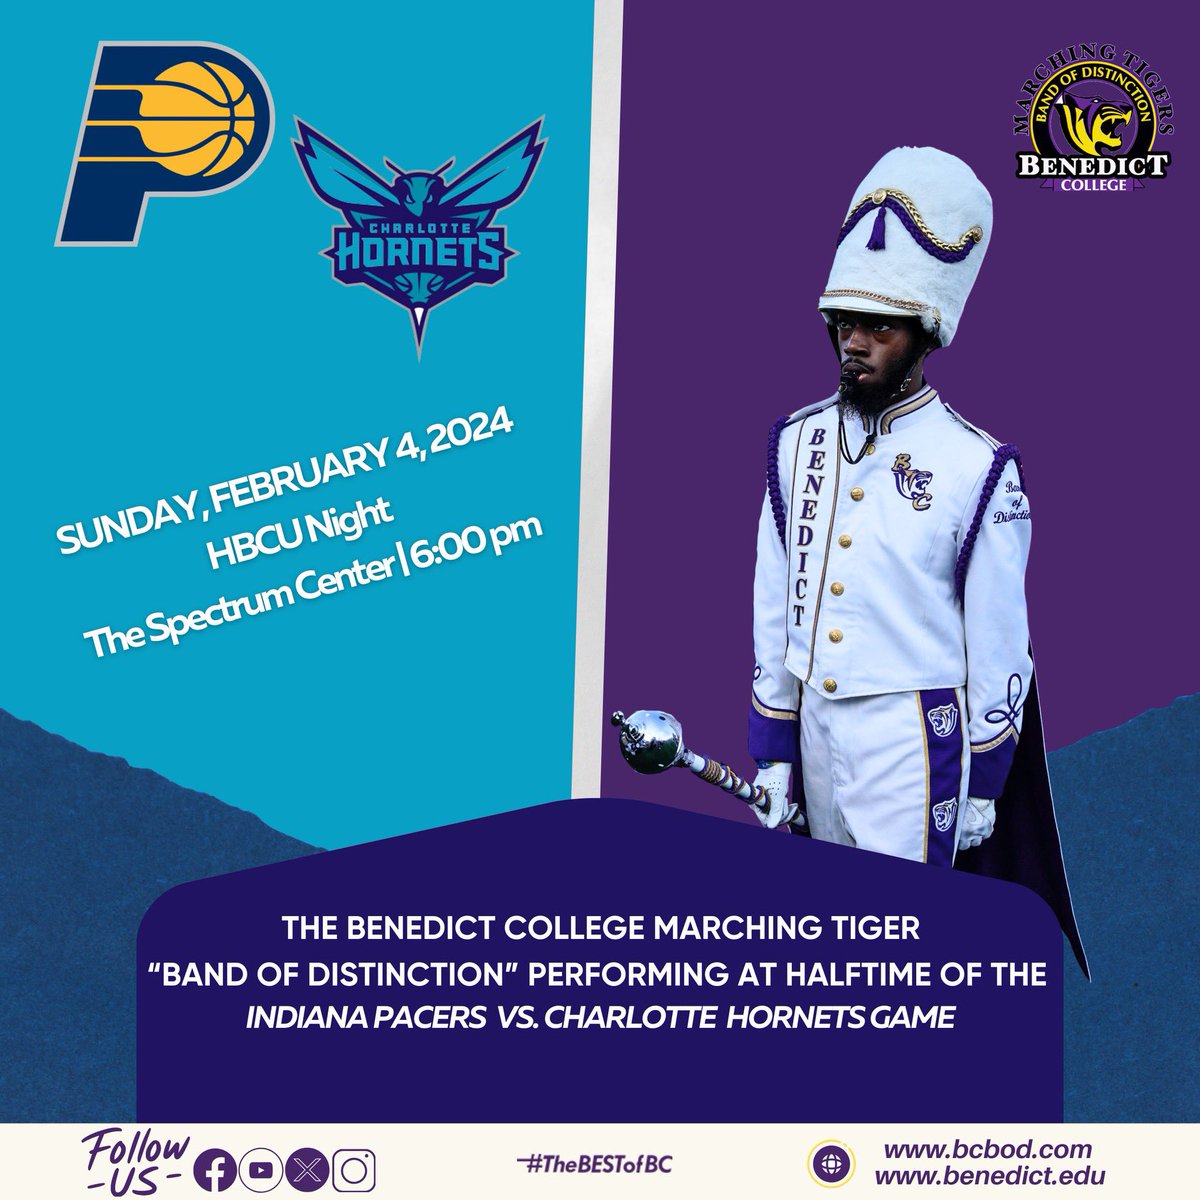 “Are You Ready, Cause Here We Go.” The BCBOD will provide the Halftime Entertainment for the Hornets vs Pacers Game. To secure tickets, please click the link below. Link to Tickets: hornets.spinzo.com/BenedictHBCU